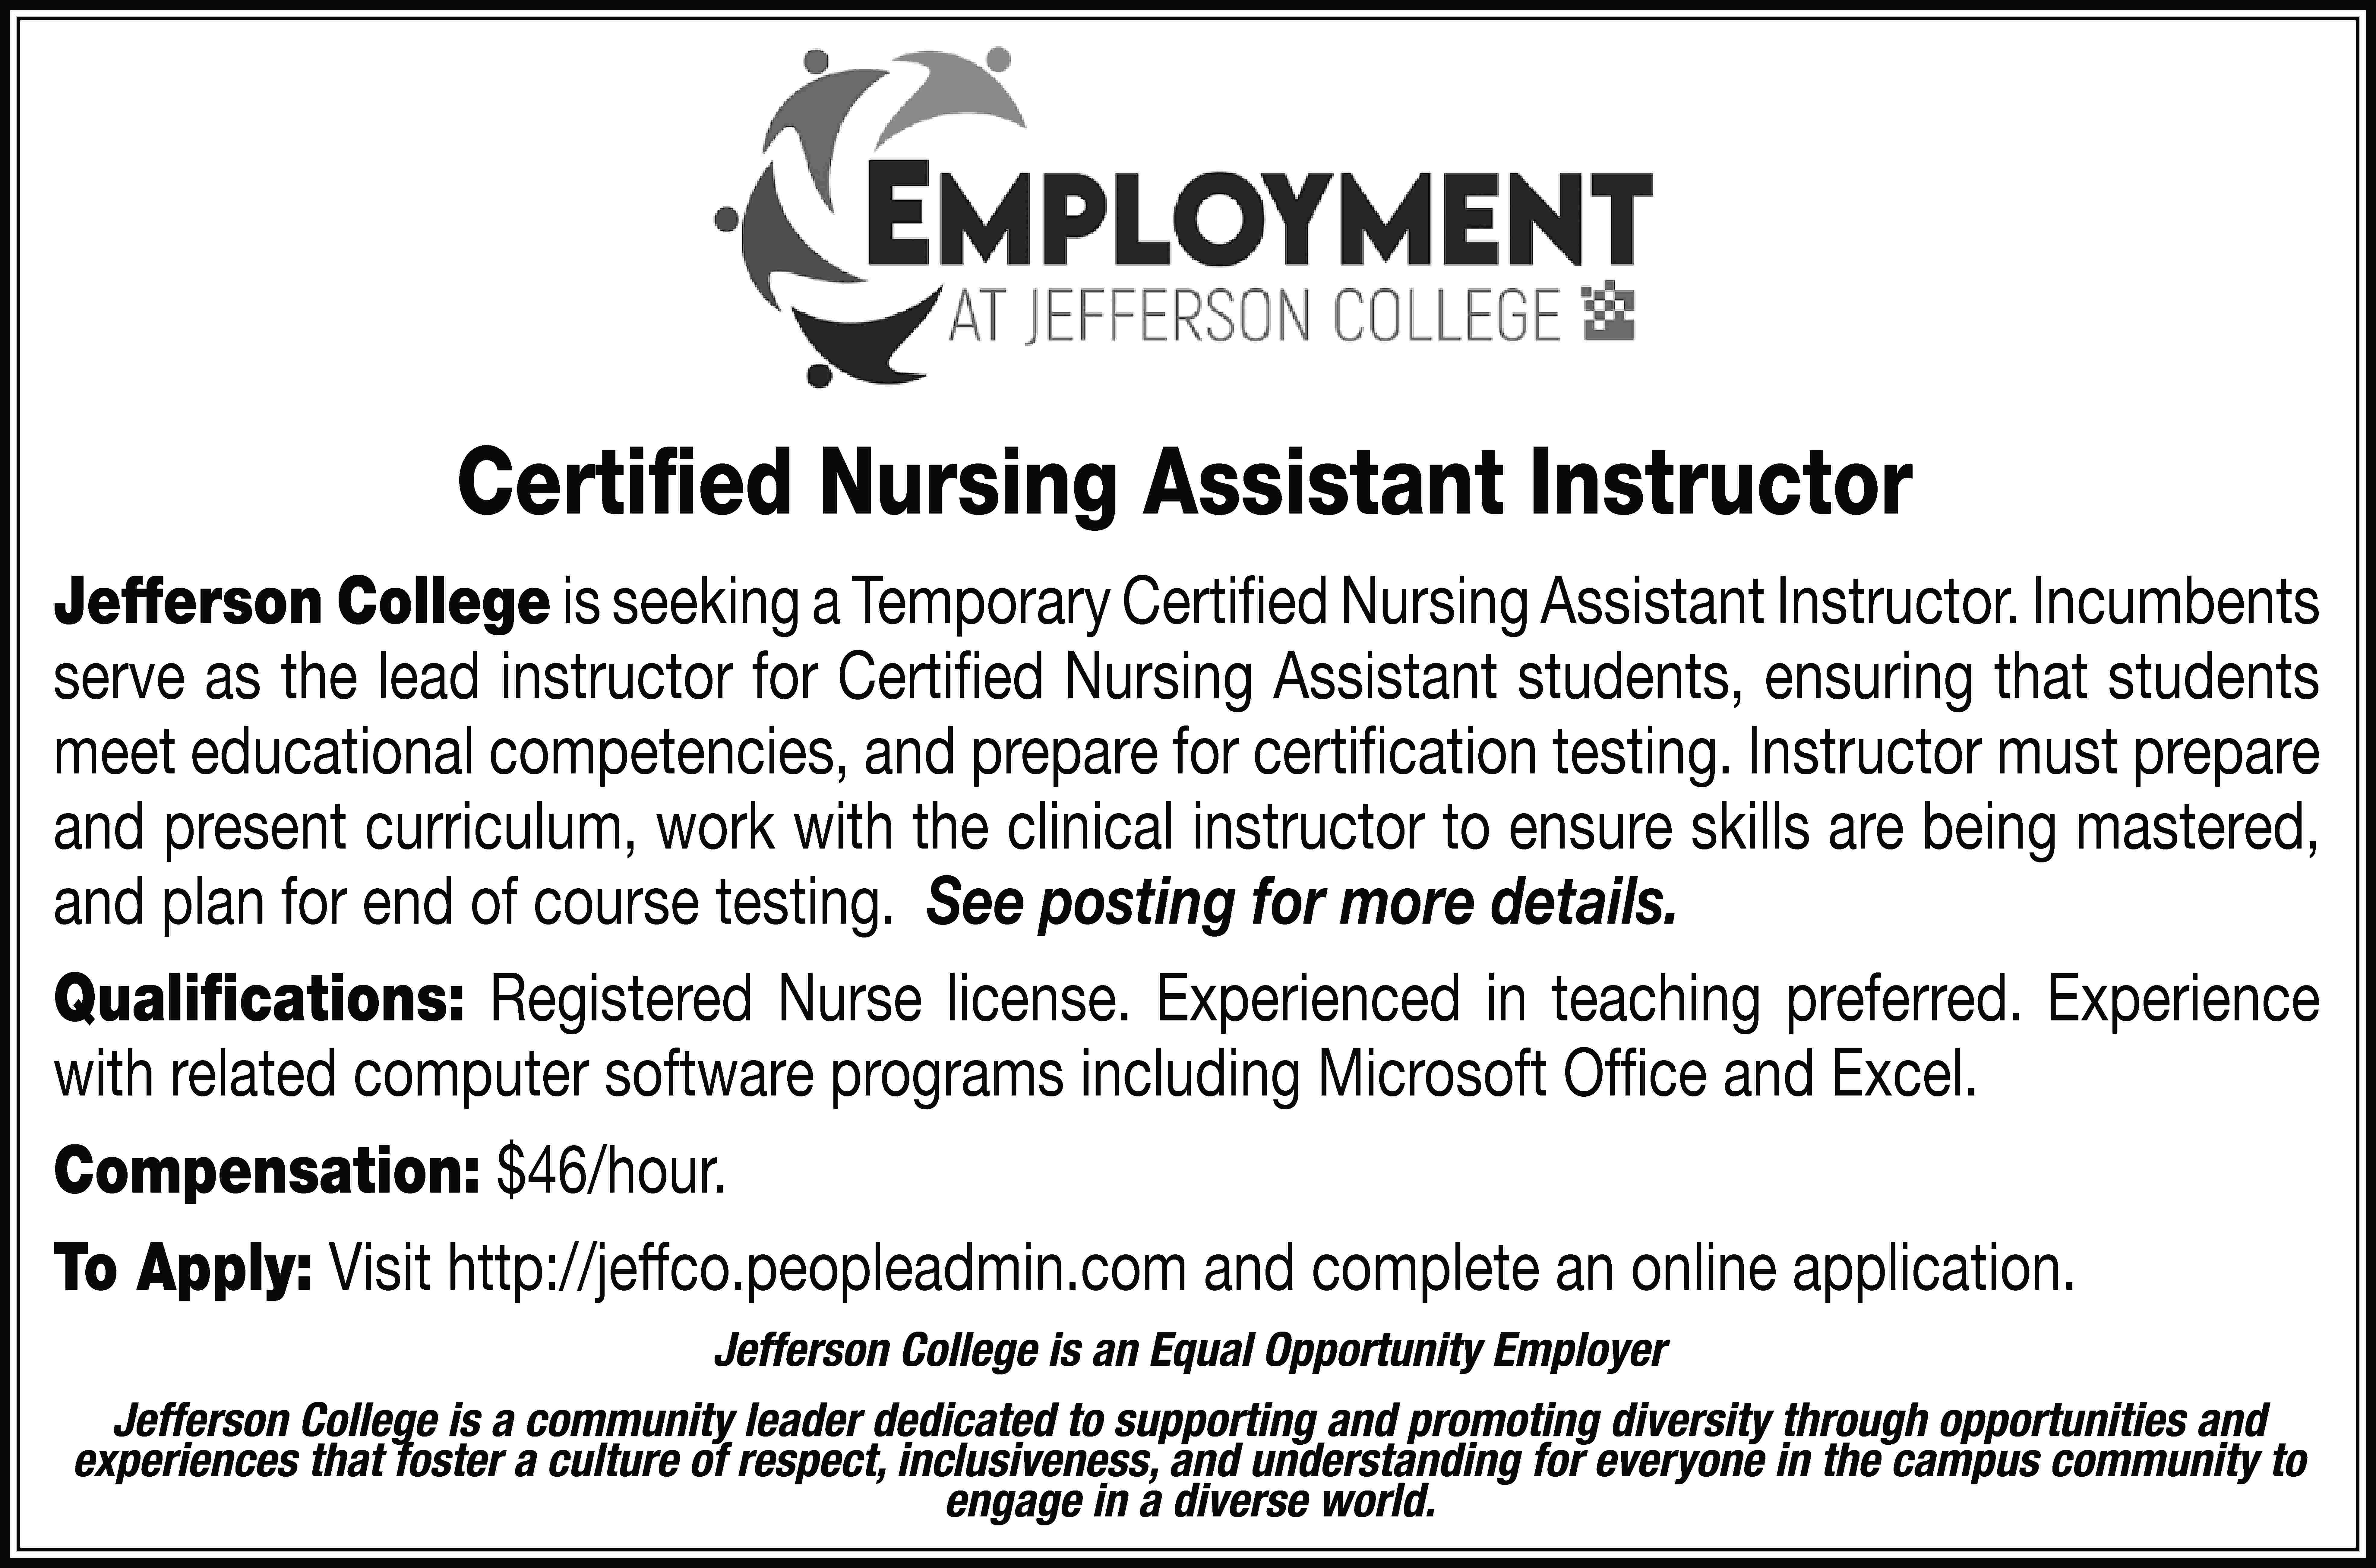 Certified Nursing Assistant Instructor Jefferson  Certified Nursing Assistant Instructor Jefferson College is seeking a Temporary Certified Nursing Assistant Instructor. Incumbents serve as the lead instructor for Certified Nursing Assistant students, ensuring that students meet educational competencies, and prepare for certification testing. Instructor must prepare and present curriculum, work with the clinical instructor to ensure skills are being mastered, and plan for end of course testing. See posting for more details. Qualifications: Registered Nurse license. Experienced in teaching preferred. Experience with related computer software programs including Microsoft Office and Excel. Compensation: $46/hour. To Apply: Visit http://jeffco.peopleadmin.com and complete an online application. Jefferson College is an Equal Opportunity Employer Jefferson College is a community leader dedicated to supporting and promoting diversity through opportunities and experiences that foster a culture of respect, inclusiveness, and understanding for everyone in the campus community to engage in a diverse world.